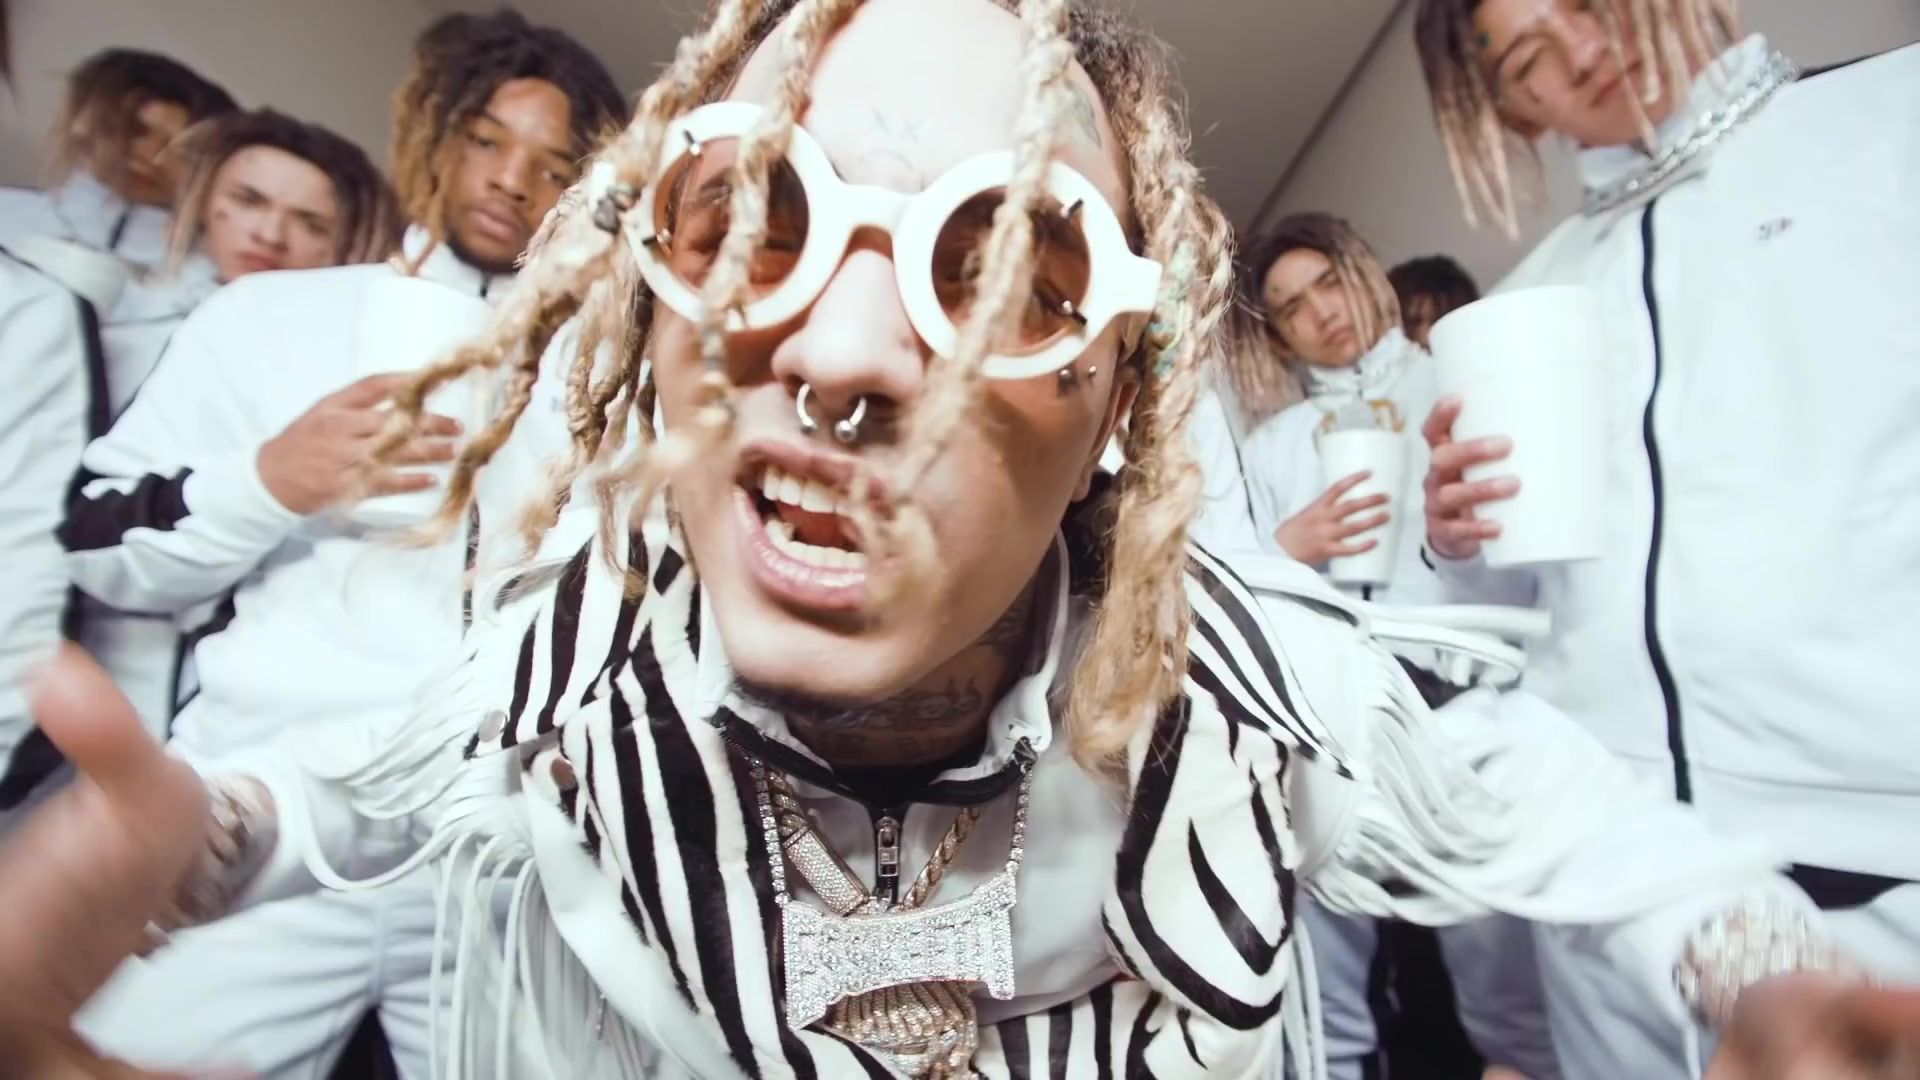 Round Glasses Worn by Lil Pump in “Be Like Me” Youtube